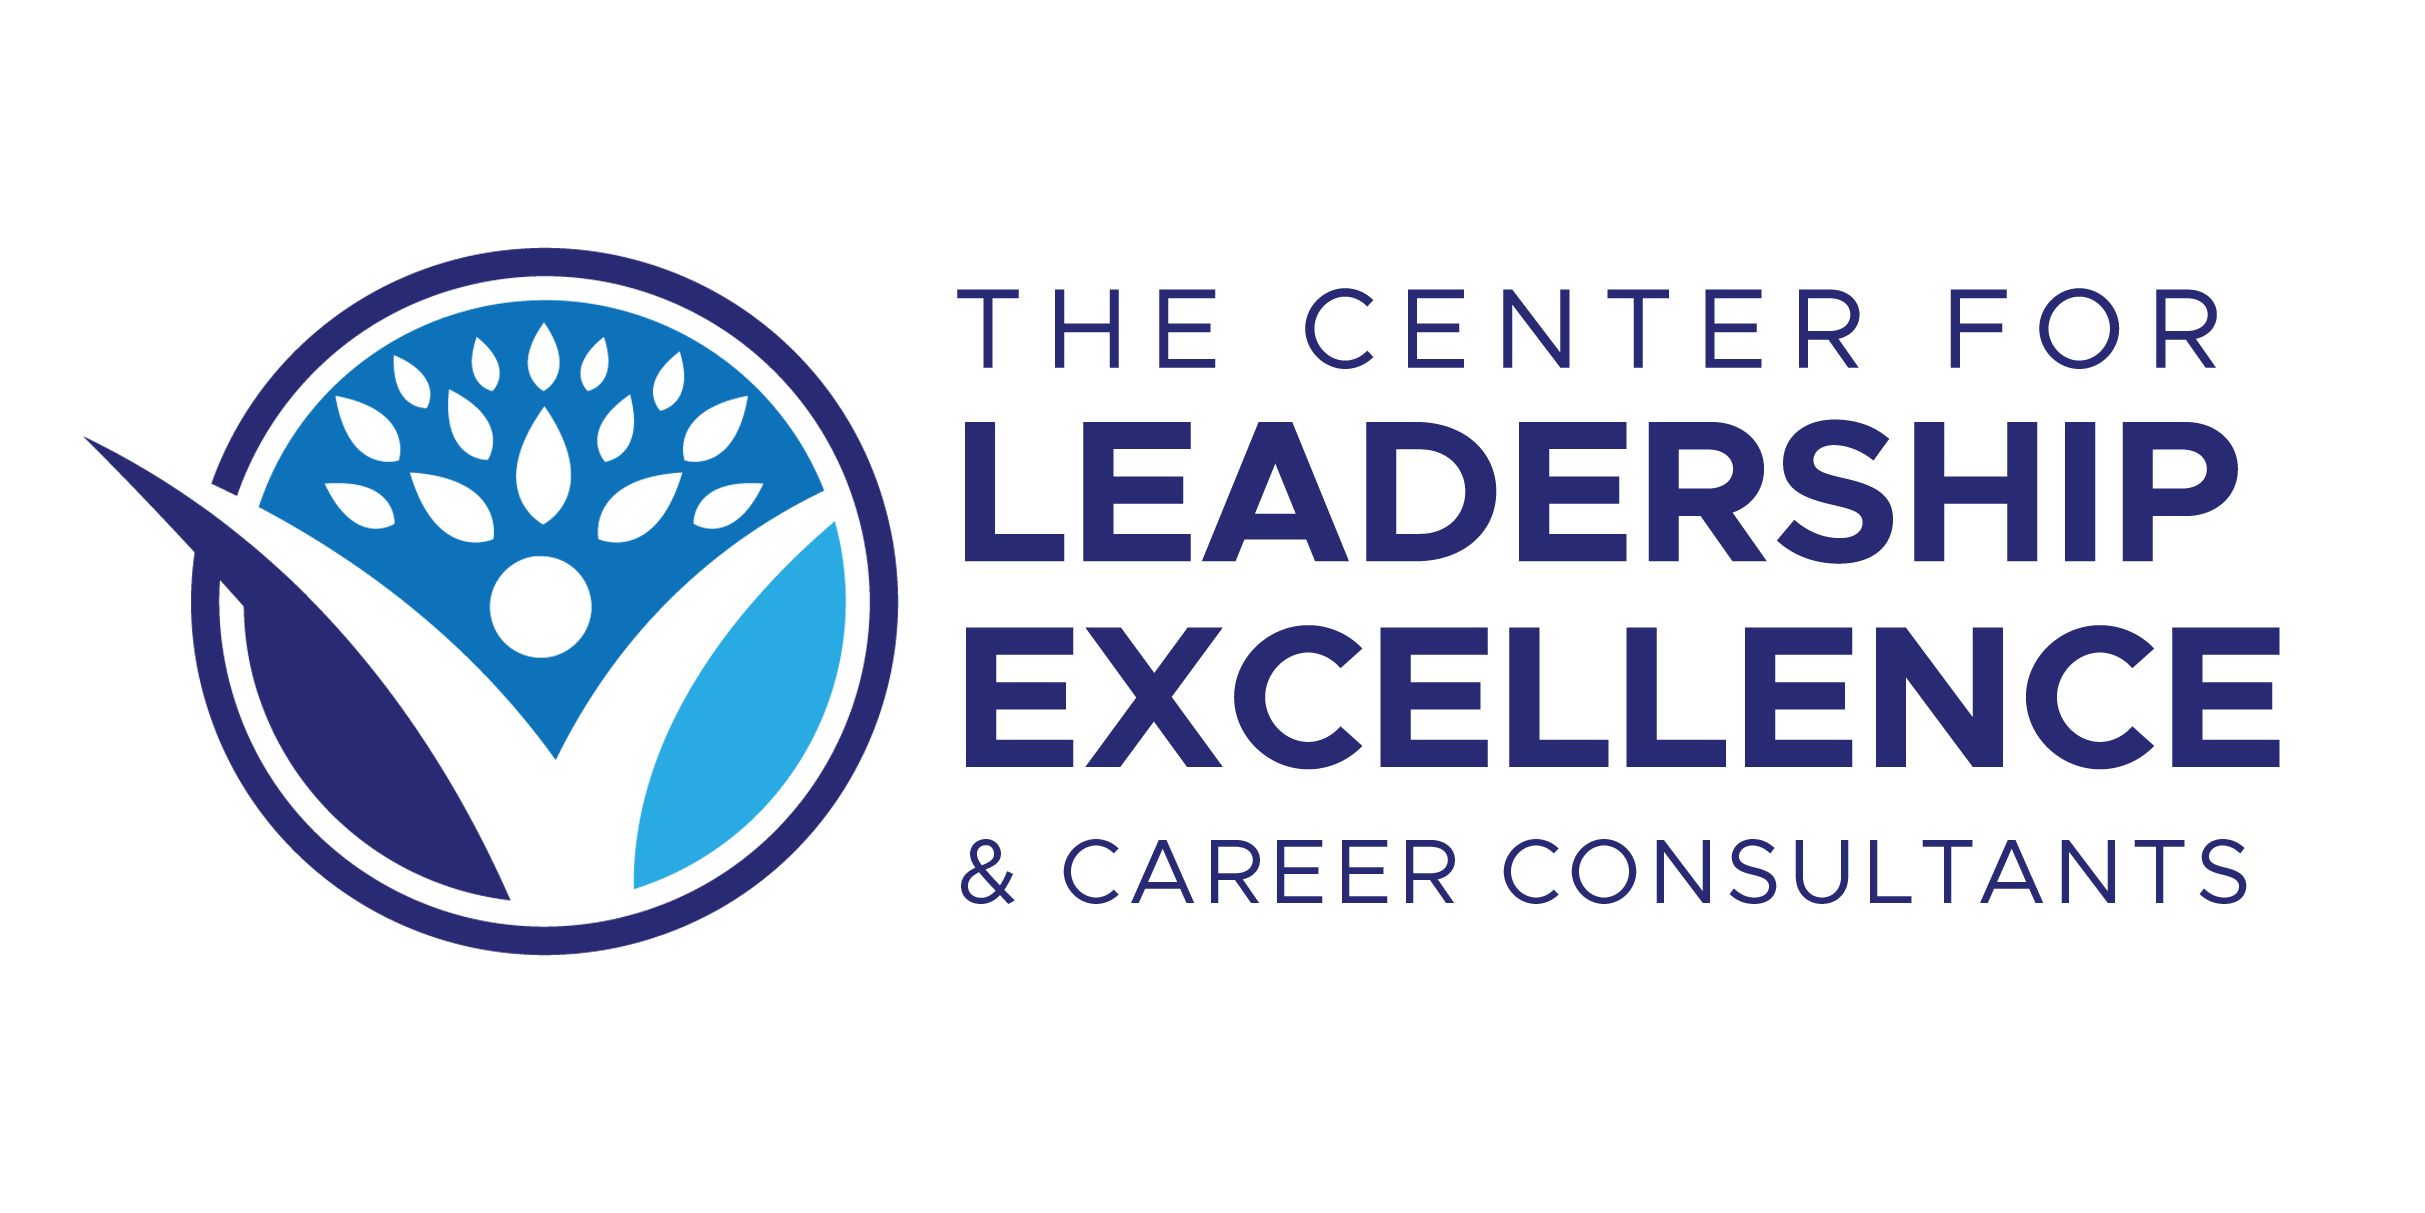 The Center for Leadership Excellence